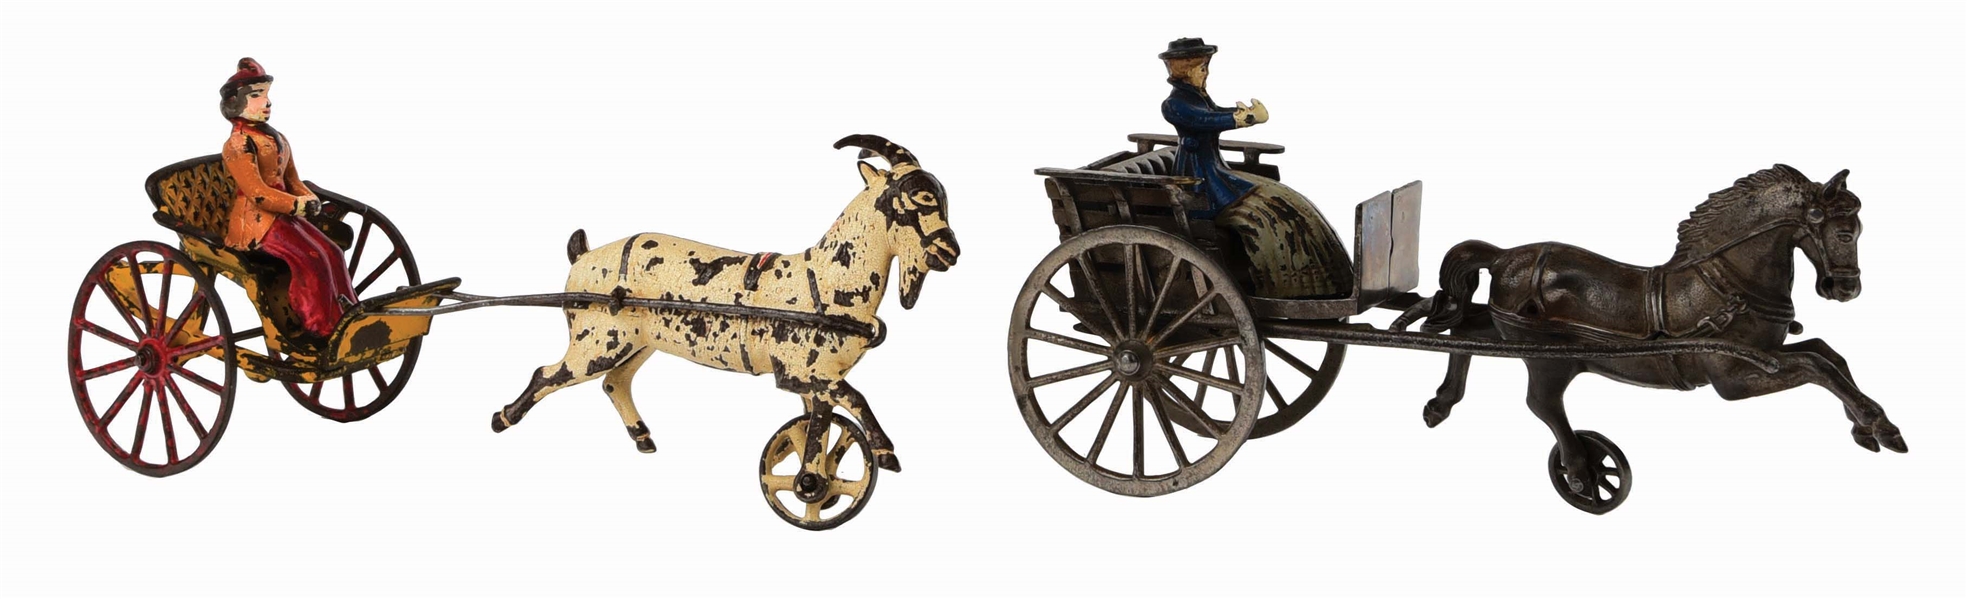 LOT OF 2: EARLY CAST-IRON HORSE DRAWN CARTS. 